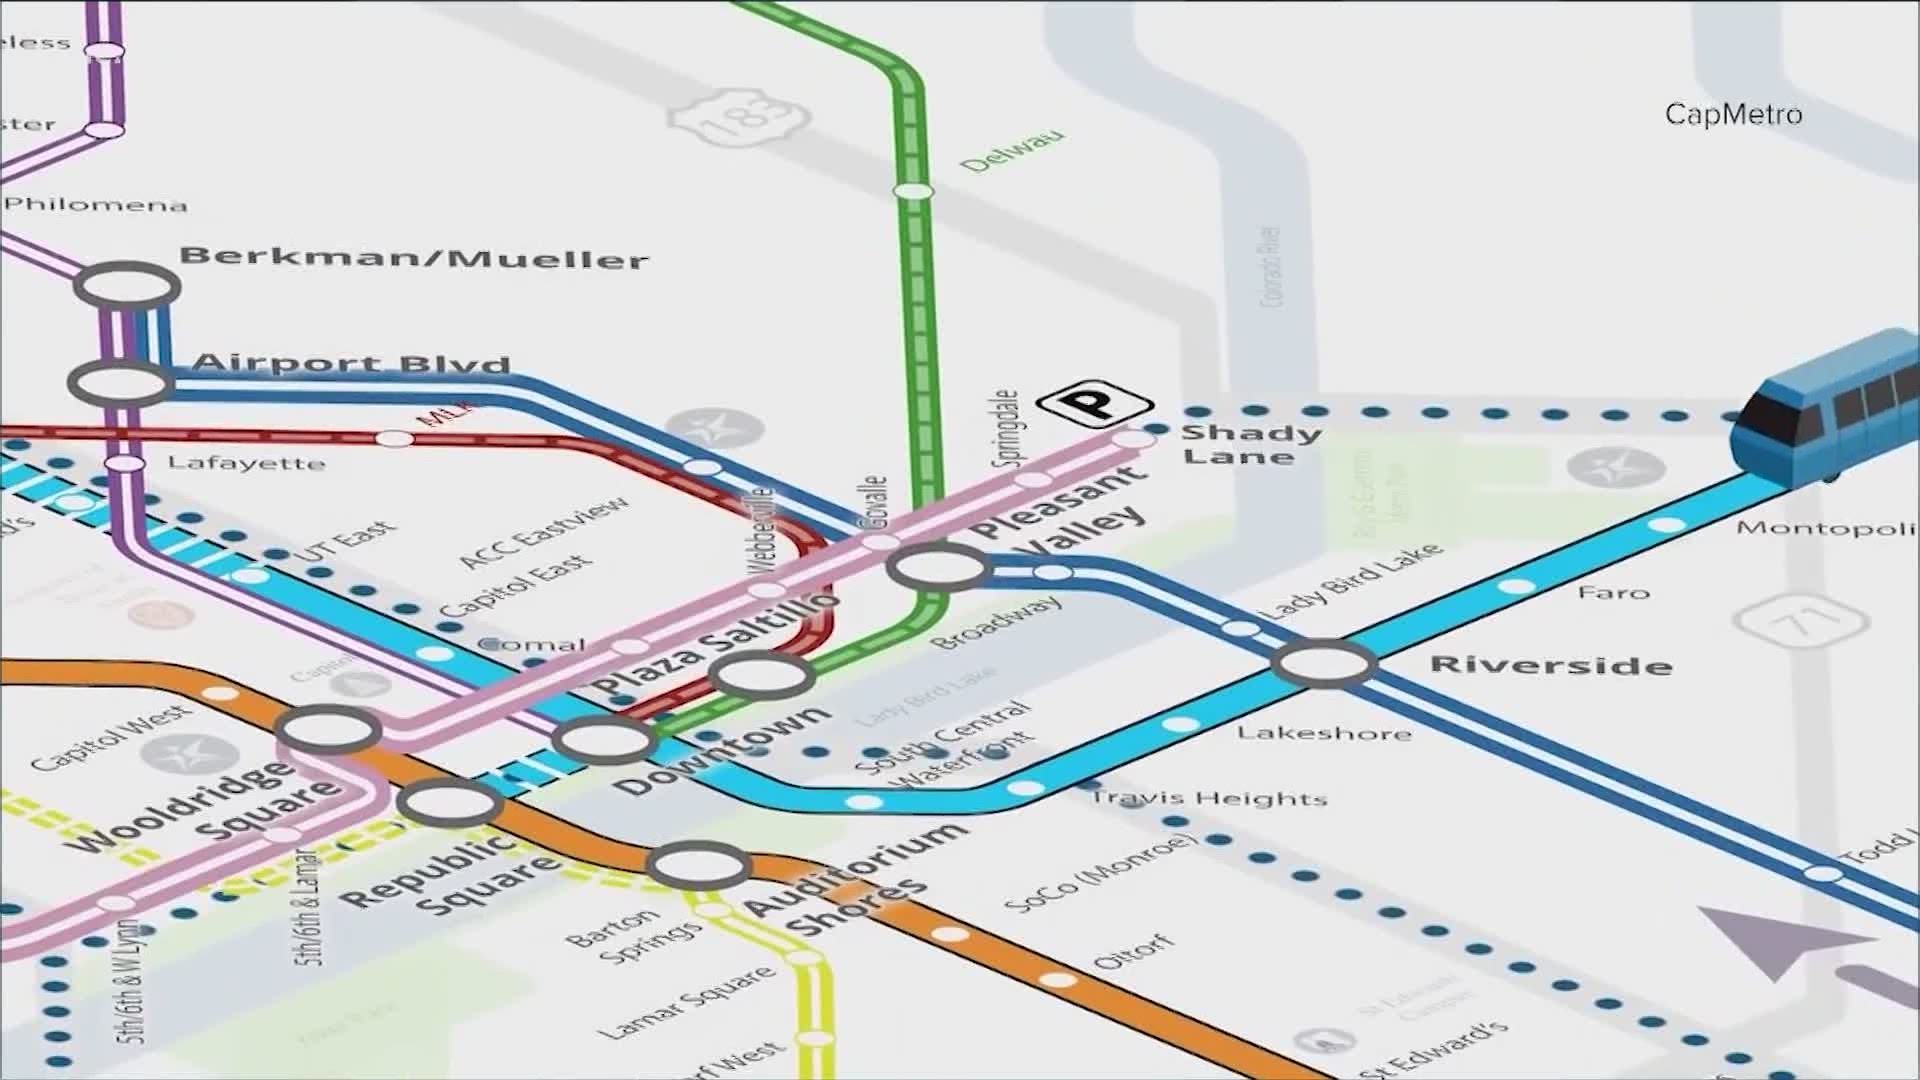 CapMetro held a virtual town hall about its plans to massively overhaul public transportation in the city Austin.